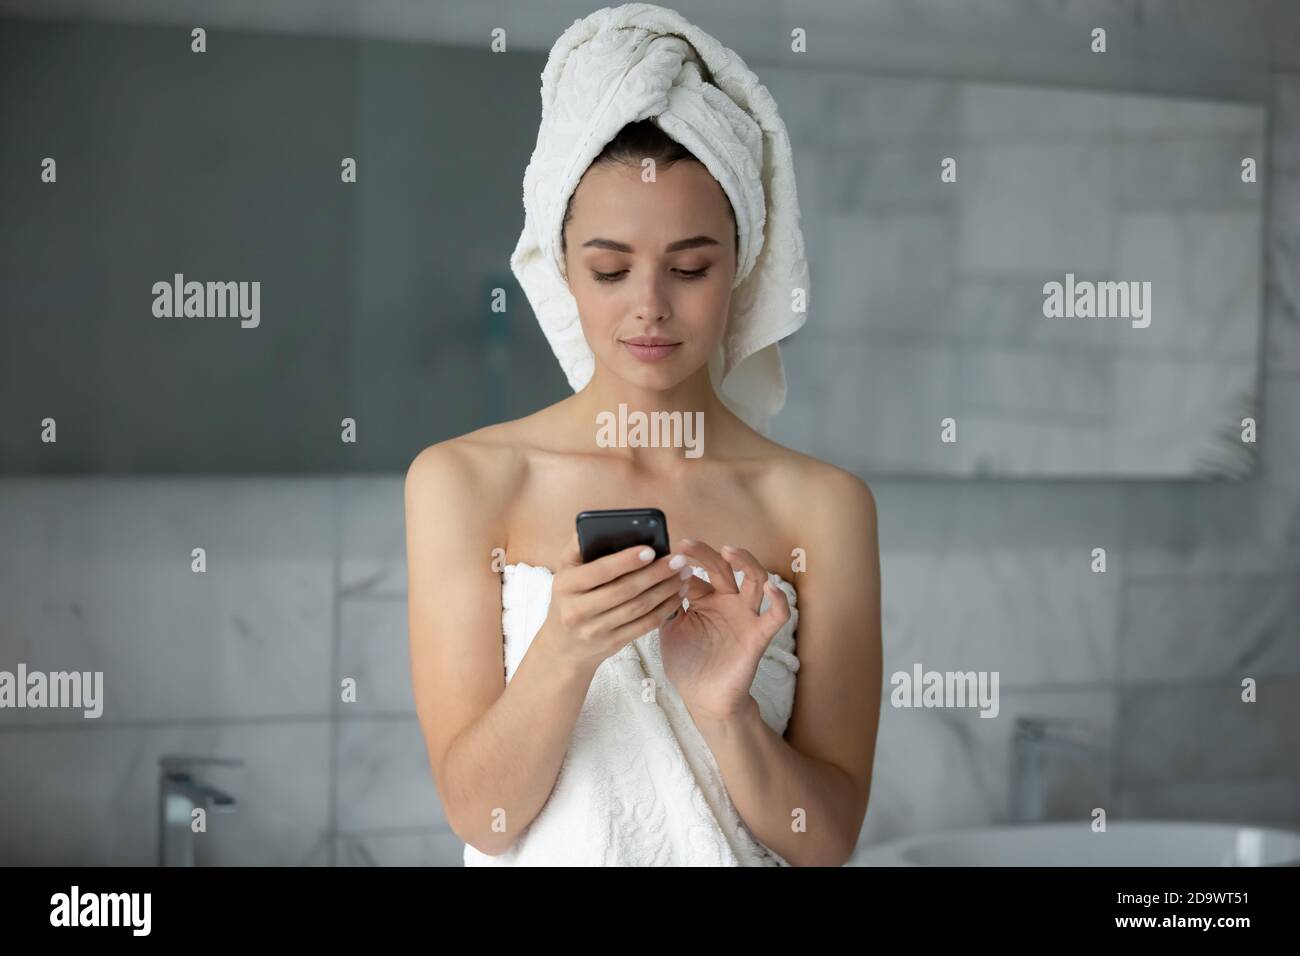 Confident positive young female using smartphone in bathroom texting message Stock Photo